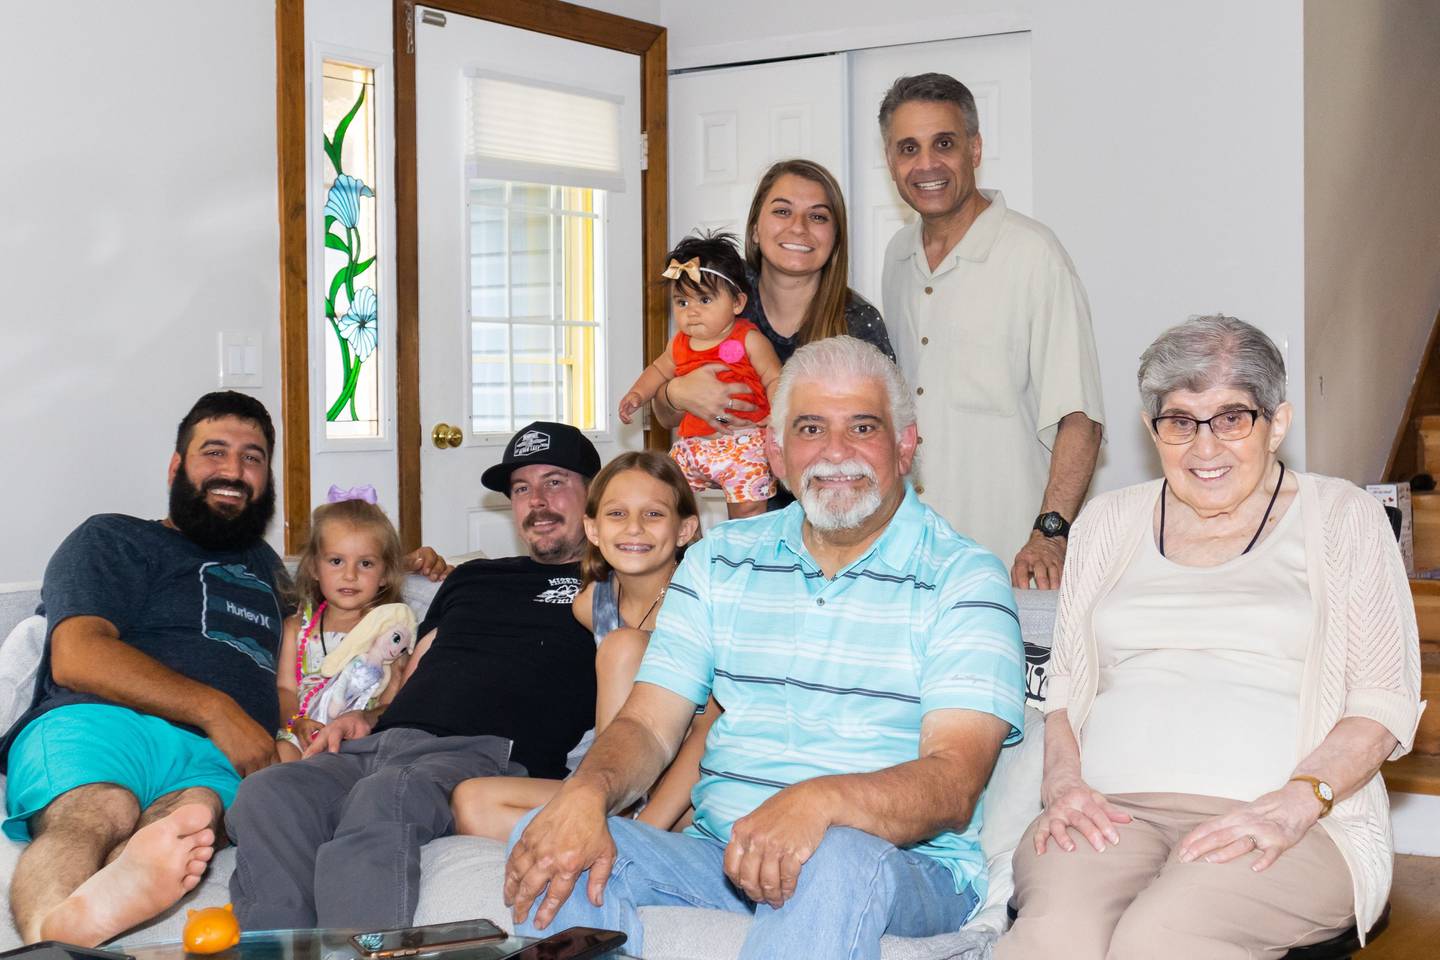 Crystal Lake resident Angelo Pleotis, 64, center,was seriously injured July 27, 2022, when a car crashed through his garage and into the home itself. Pleotis' family said he may be paralyzed for life now.